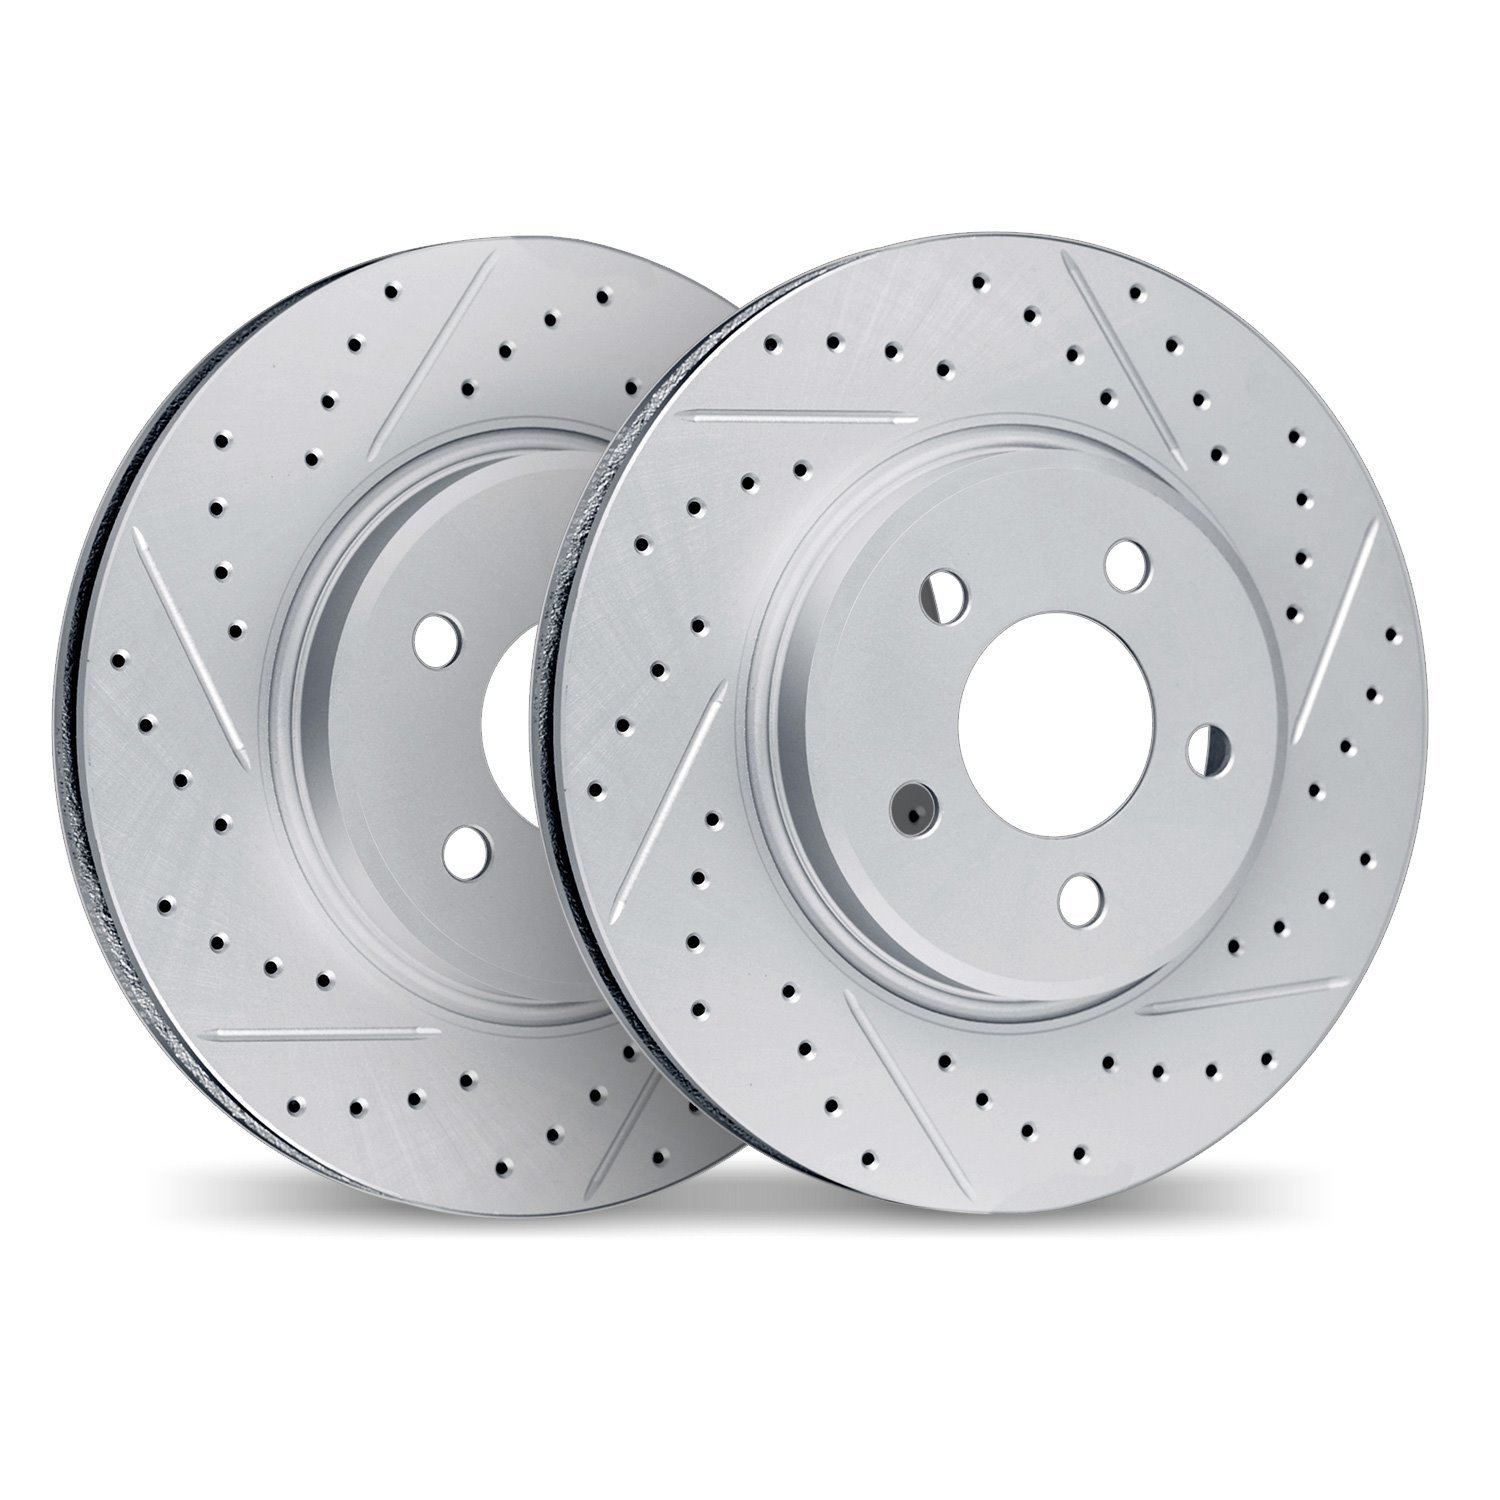 2002-54014 Geoperformance Drilled/Slotted Brake Rotors, 1994-2001 Ford/Lincoln/Mercury/Mazda, Position: Front